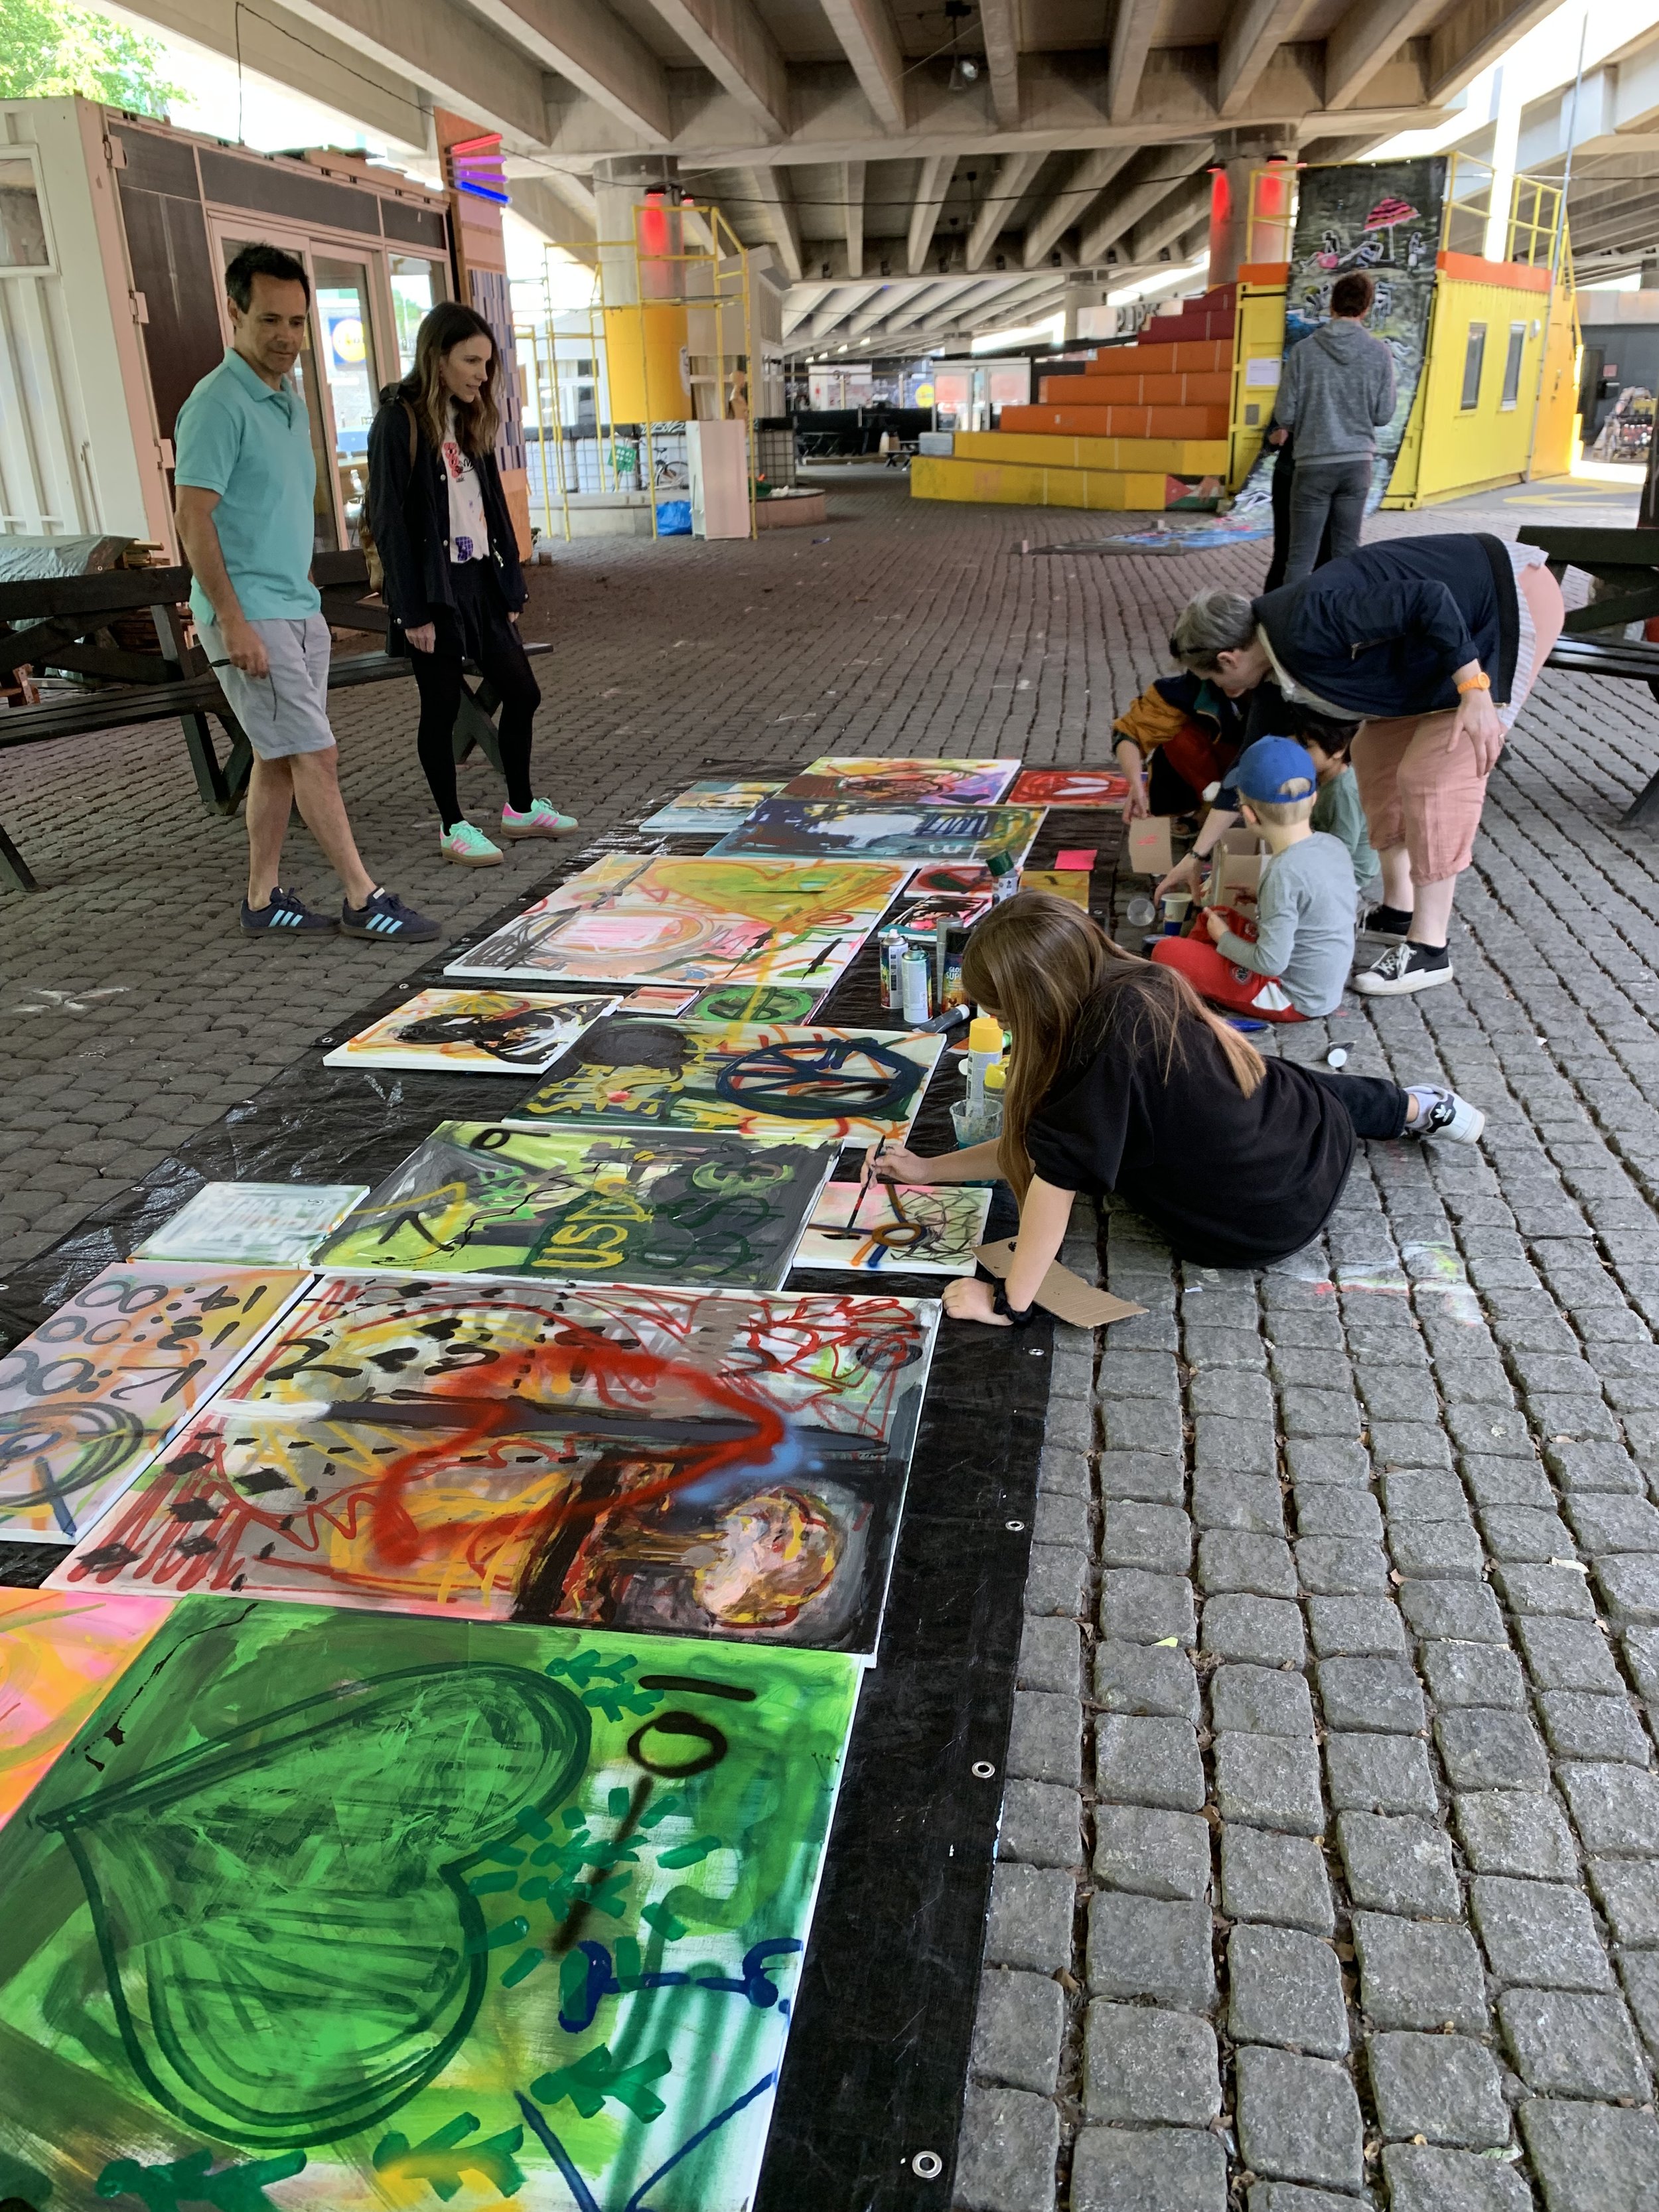  Children and adults work side-by-side. Even for some of the adults, it was their first time using spray paint. 